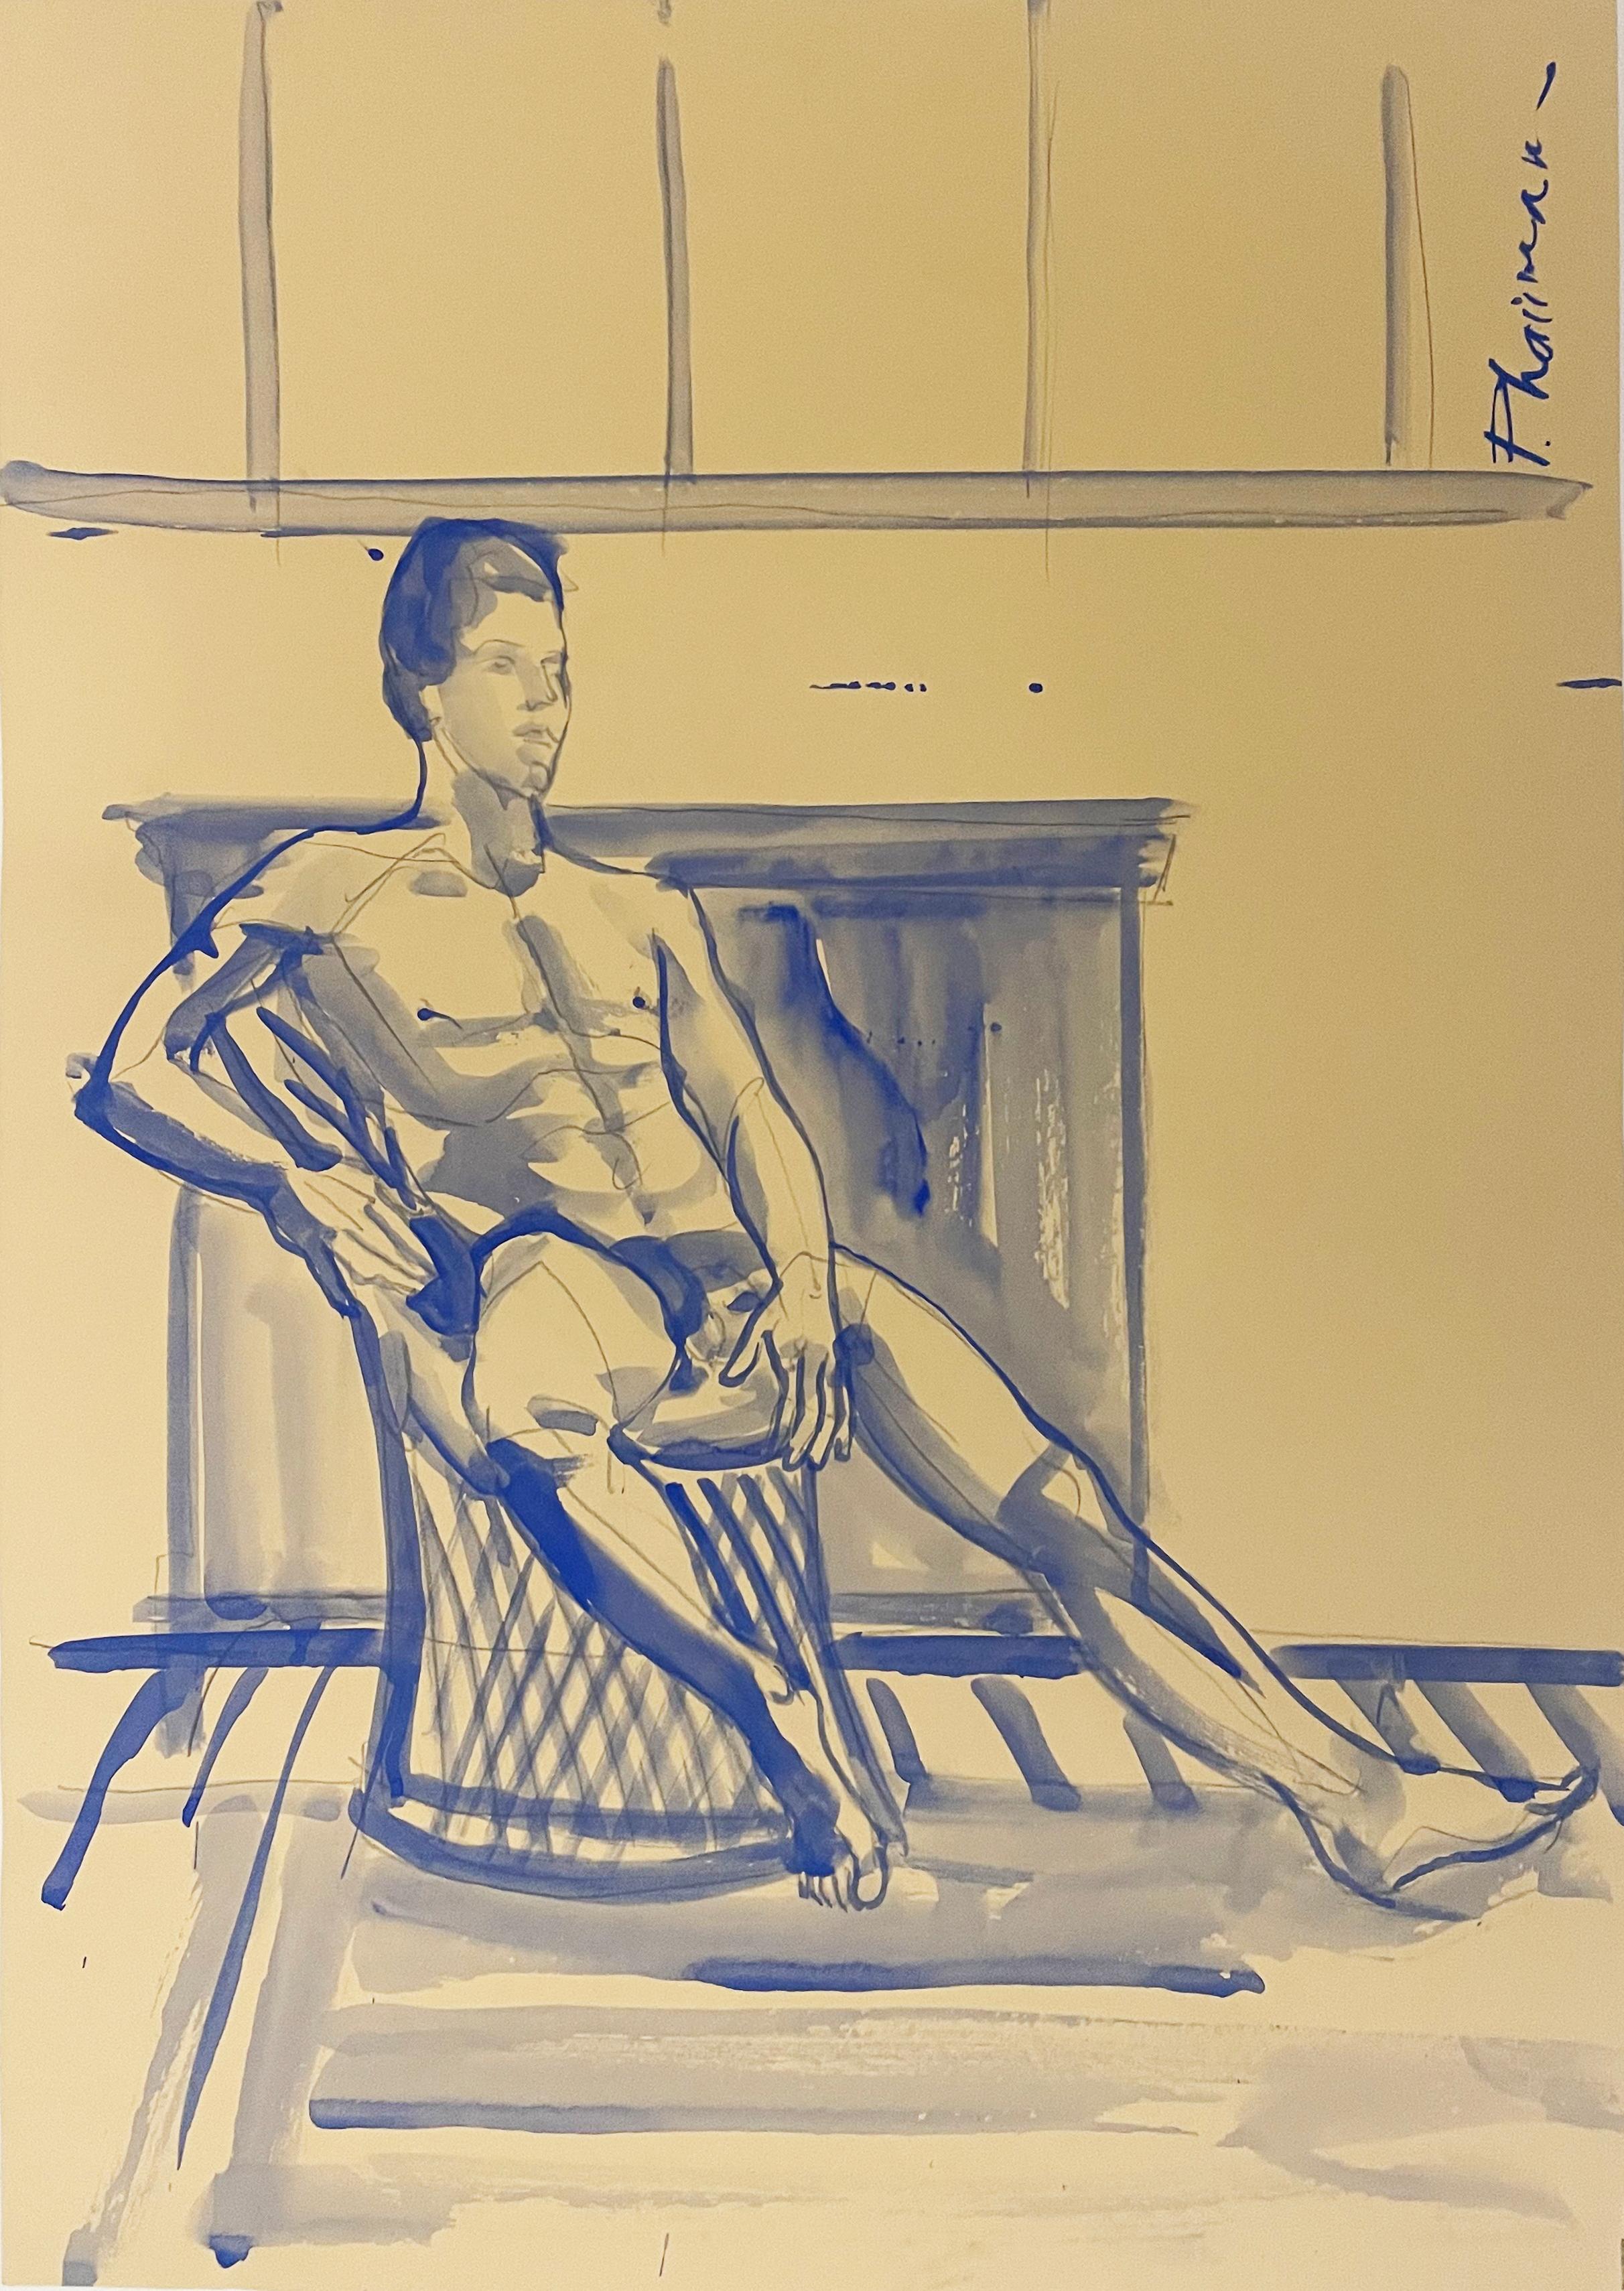 Room with a View
Male nude, made with ultramarine blue tempera, inspired by Matisse.
70x50cm / 27.5x19.5in
Shipped rolled in a tube directly from the artist.
Part of my previous Nude Men series.

1st dibs offers free shipping for certain items,